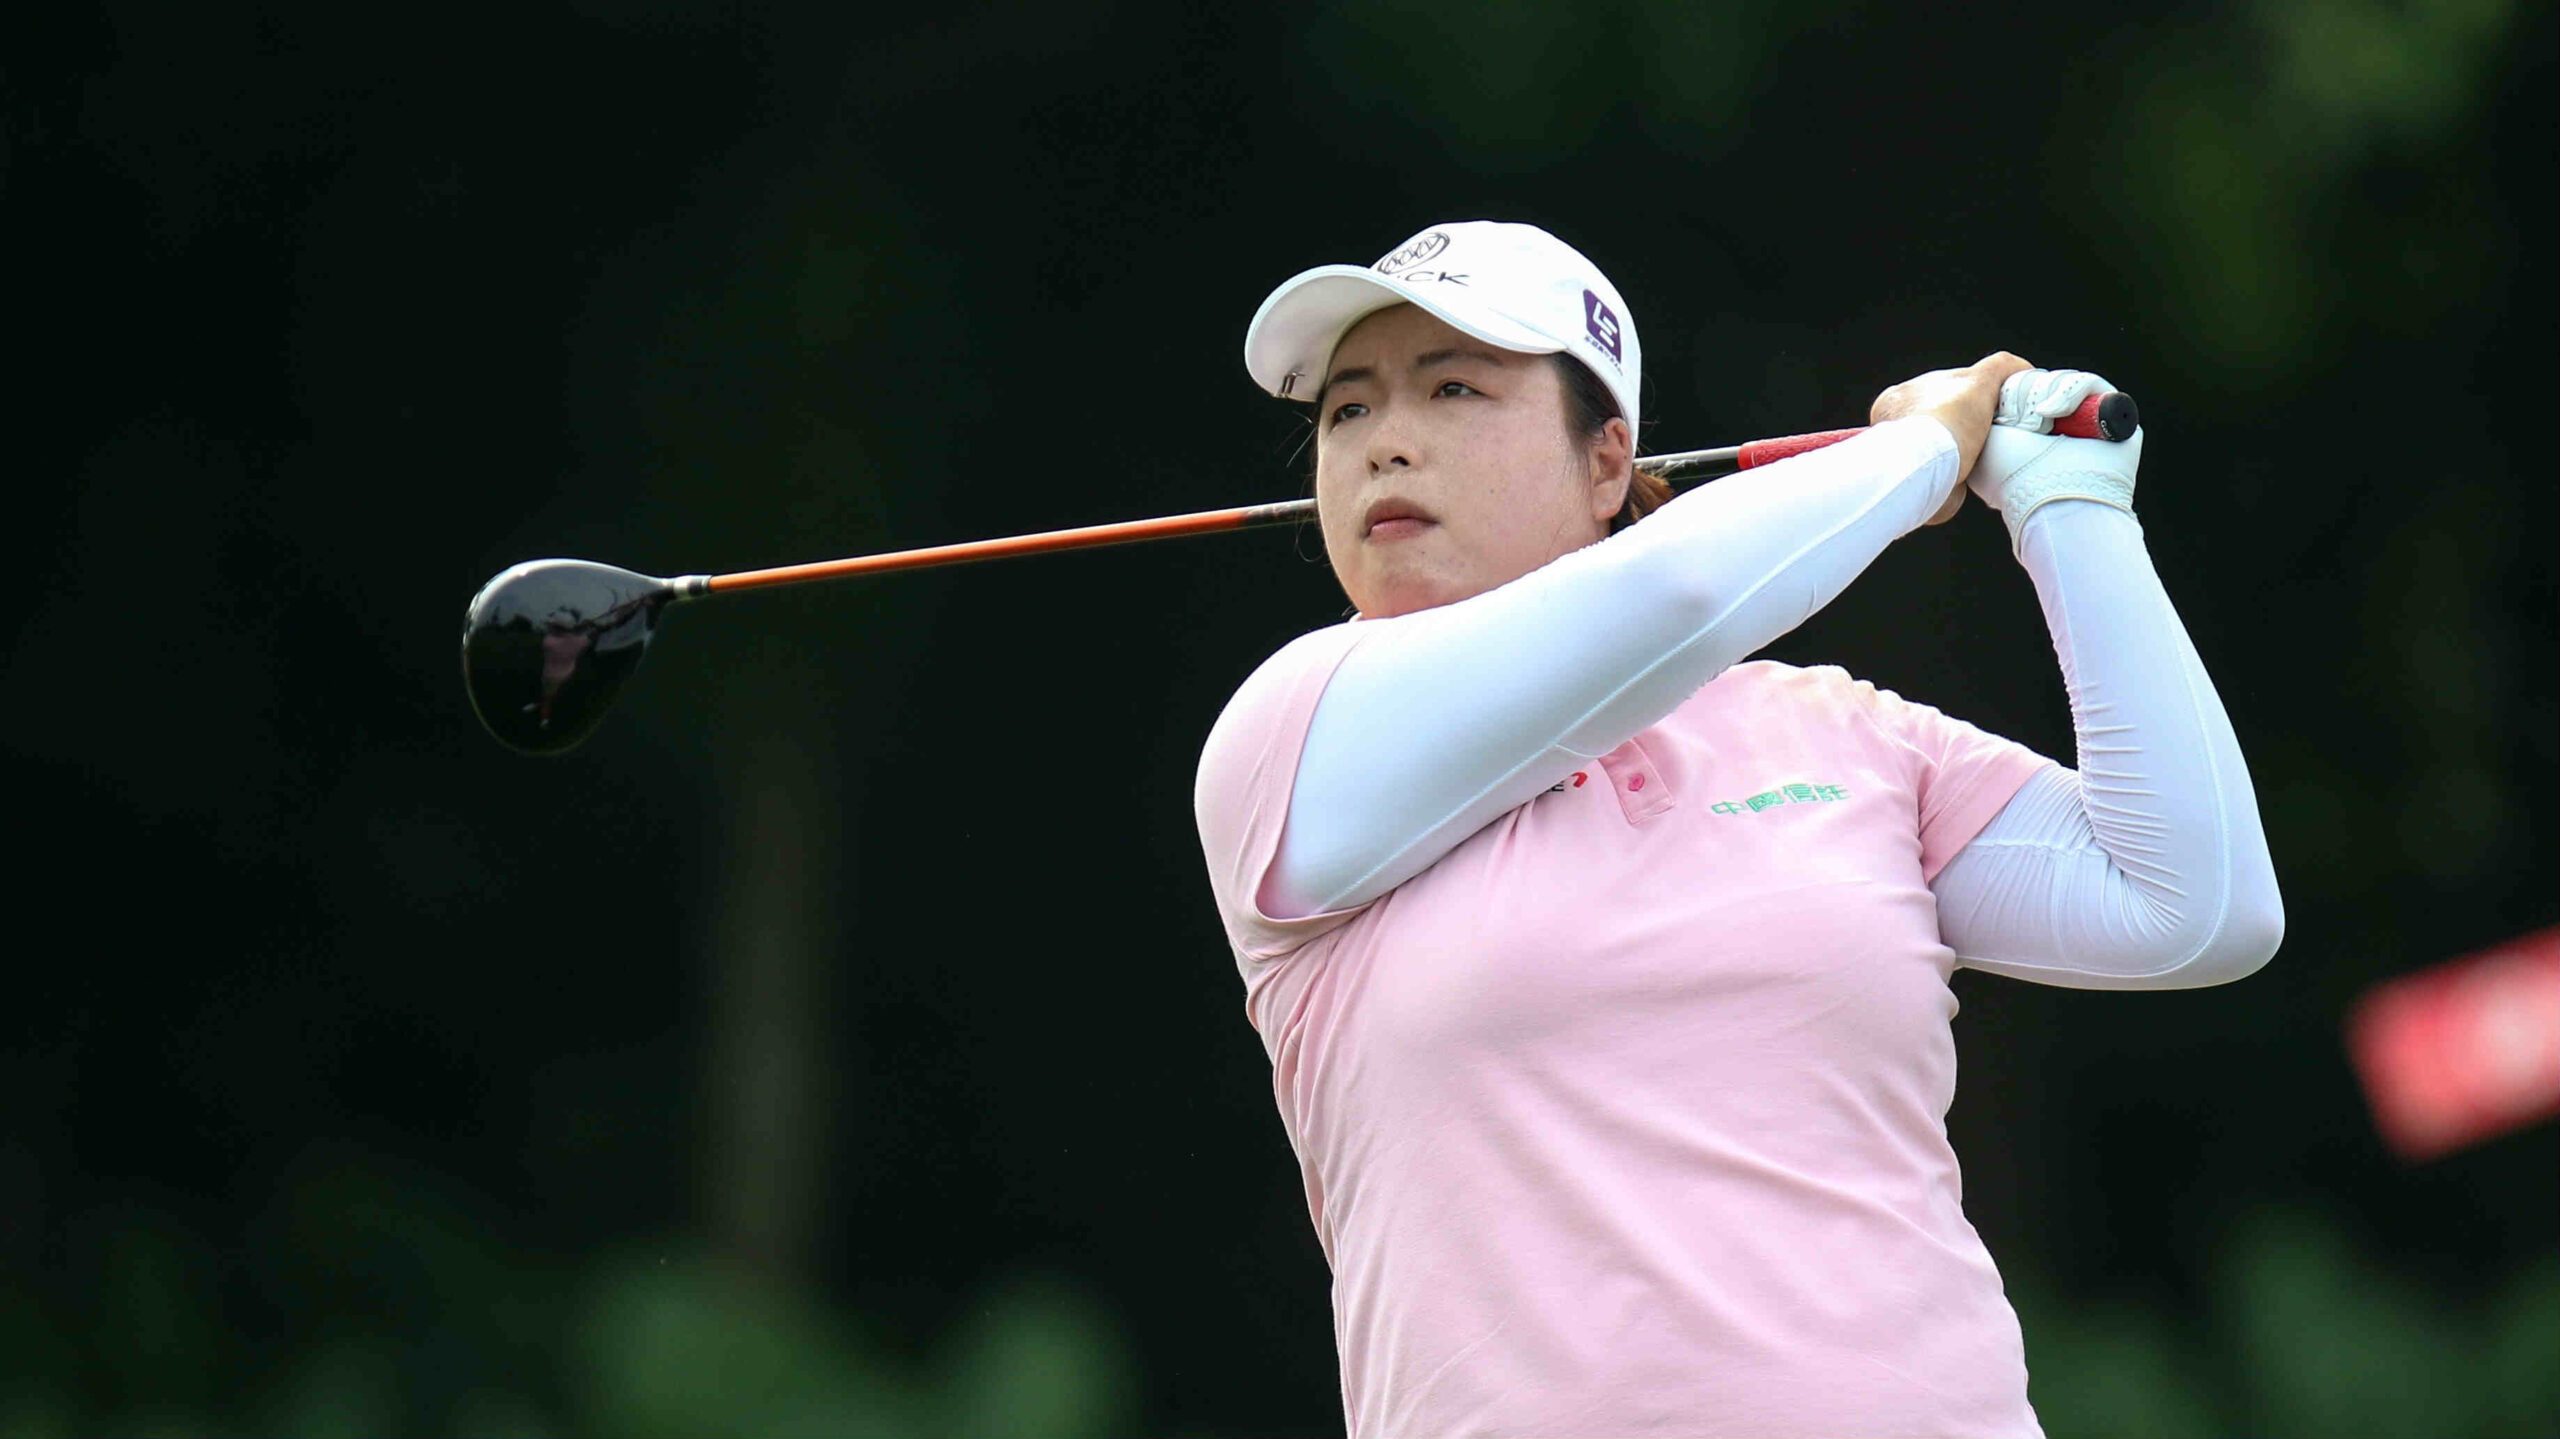 Feng Shanshan is China’s first world number 1 golfer